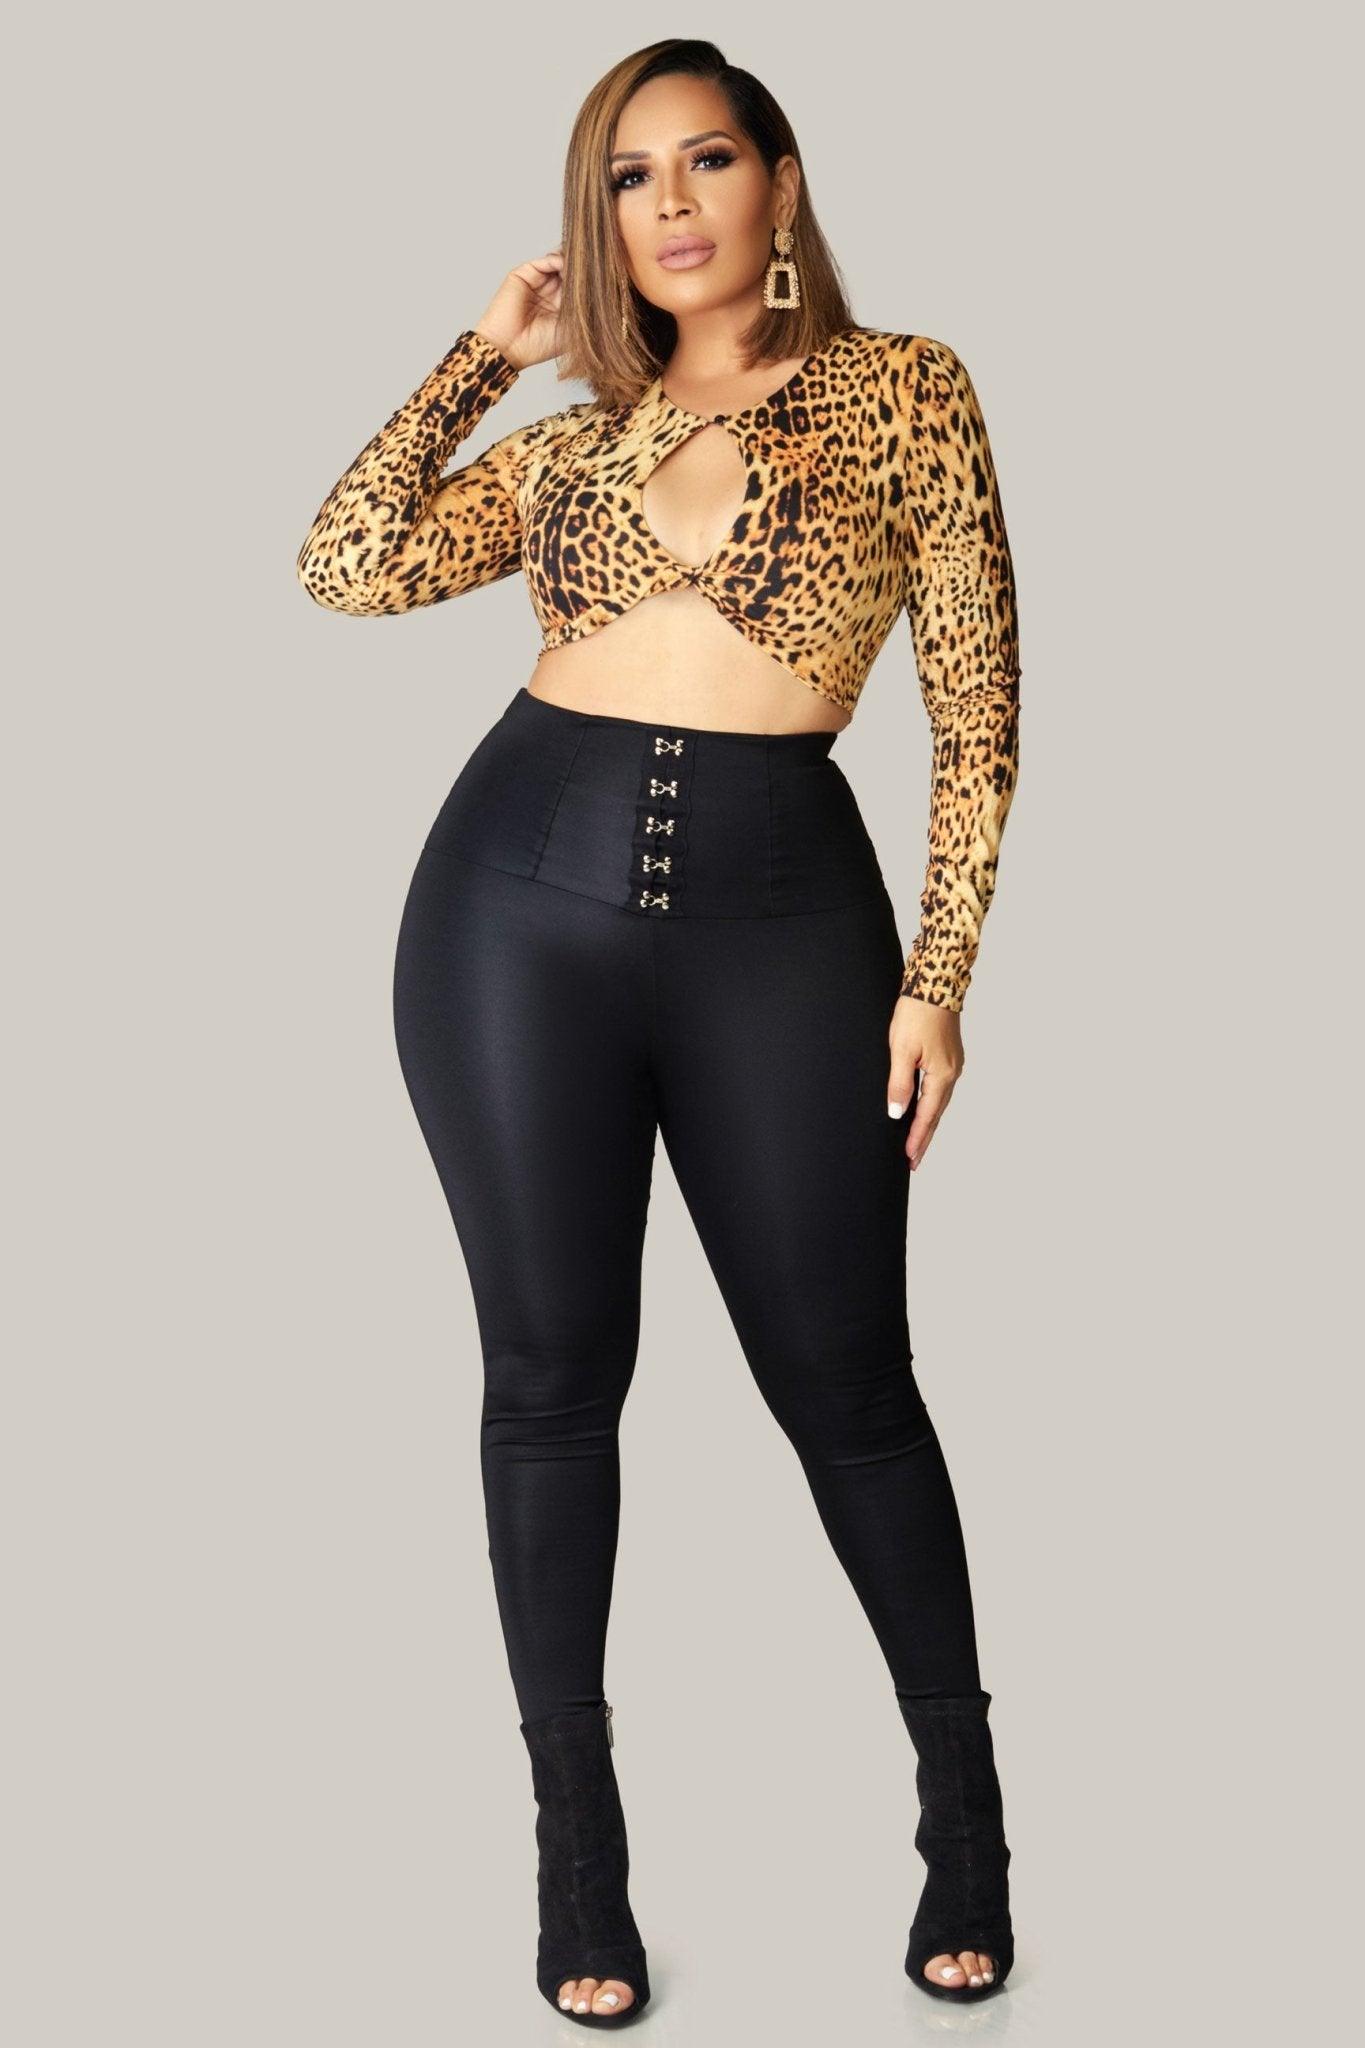 Animal instincts Long Sleeve Crop Top w/ Keyhole Detail - MY SEXY STYLES